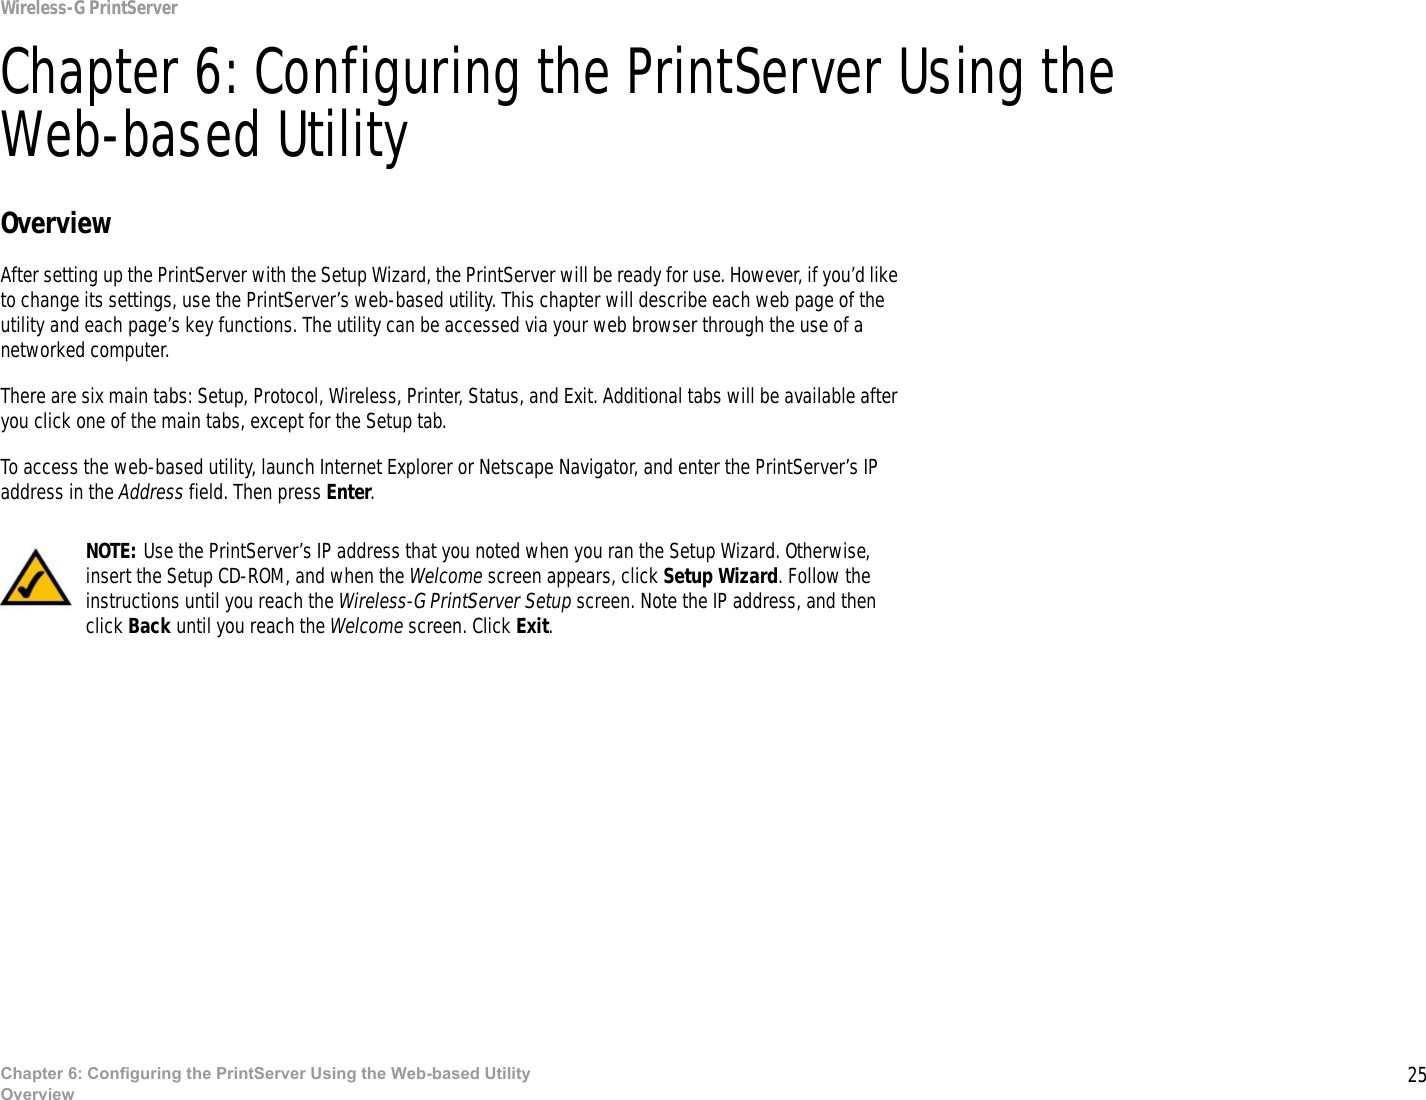 25Chapter 6: Configuring the PrintServer Using the Web-based UtilityOverviewWireless-G PrintServerChapter 6: Configuring the PrintServer Using the Web-based UtilityOverviewAfter setting up the PrintServer with the Setup Wizard, the PrintServer will be ready for use. However, if you’d like to change its settings, use the PrintServer’s web-based utility. This chapter will describe each web page of the utility and each page’s key functions. The utility can be accessed via your web browser through the use of a networked computer.There are six main tabs: Setup, Protocol, Wireless, Printer, Status, and Exit. Additional tabs will be available after you click one of the main tabs, except for the Setup tab.To access the web-based utility, launch Internet Explorer or Netscape Navigator, and enter the PrintServer’s IP address in the Address field. Then press Enter.NOTE: Use the PrintServer’s IP address that you noted when you ran the Setup Wizard. Otherwise, insert the Setup CD-ROM, and when the Welcome screen appears, click Setup Wizard. Follow the instructions until you reach the Wireless-G PrintServer Setup screen. Note the IP address, and then click Back until you reach the Welcome screen. Click Exit.